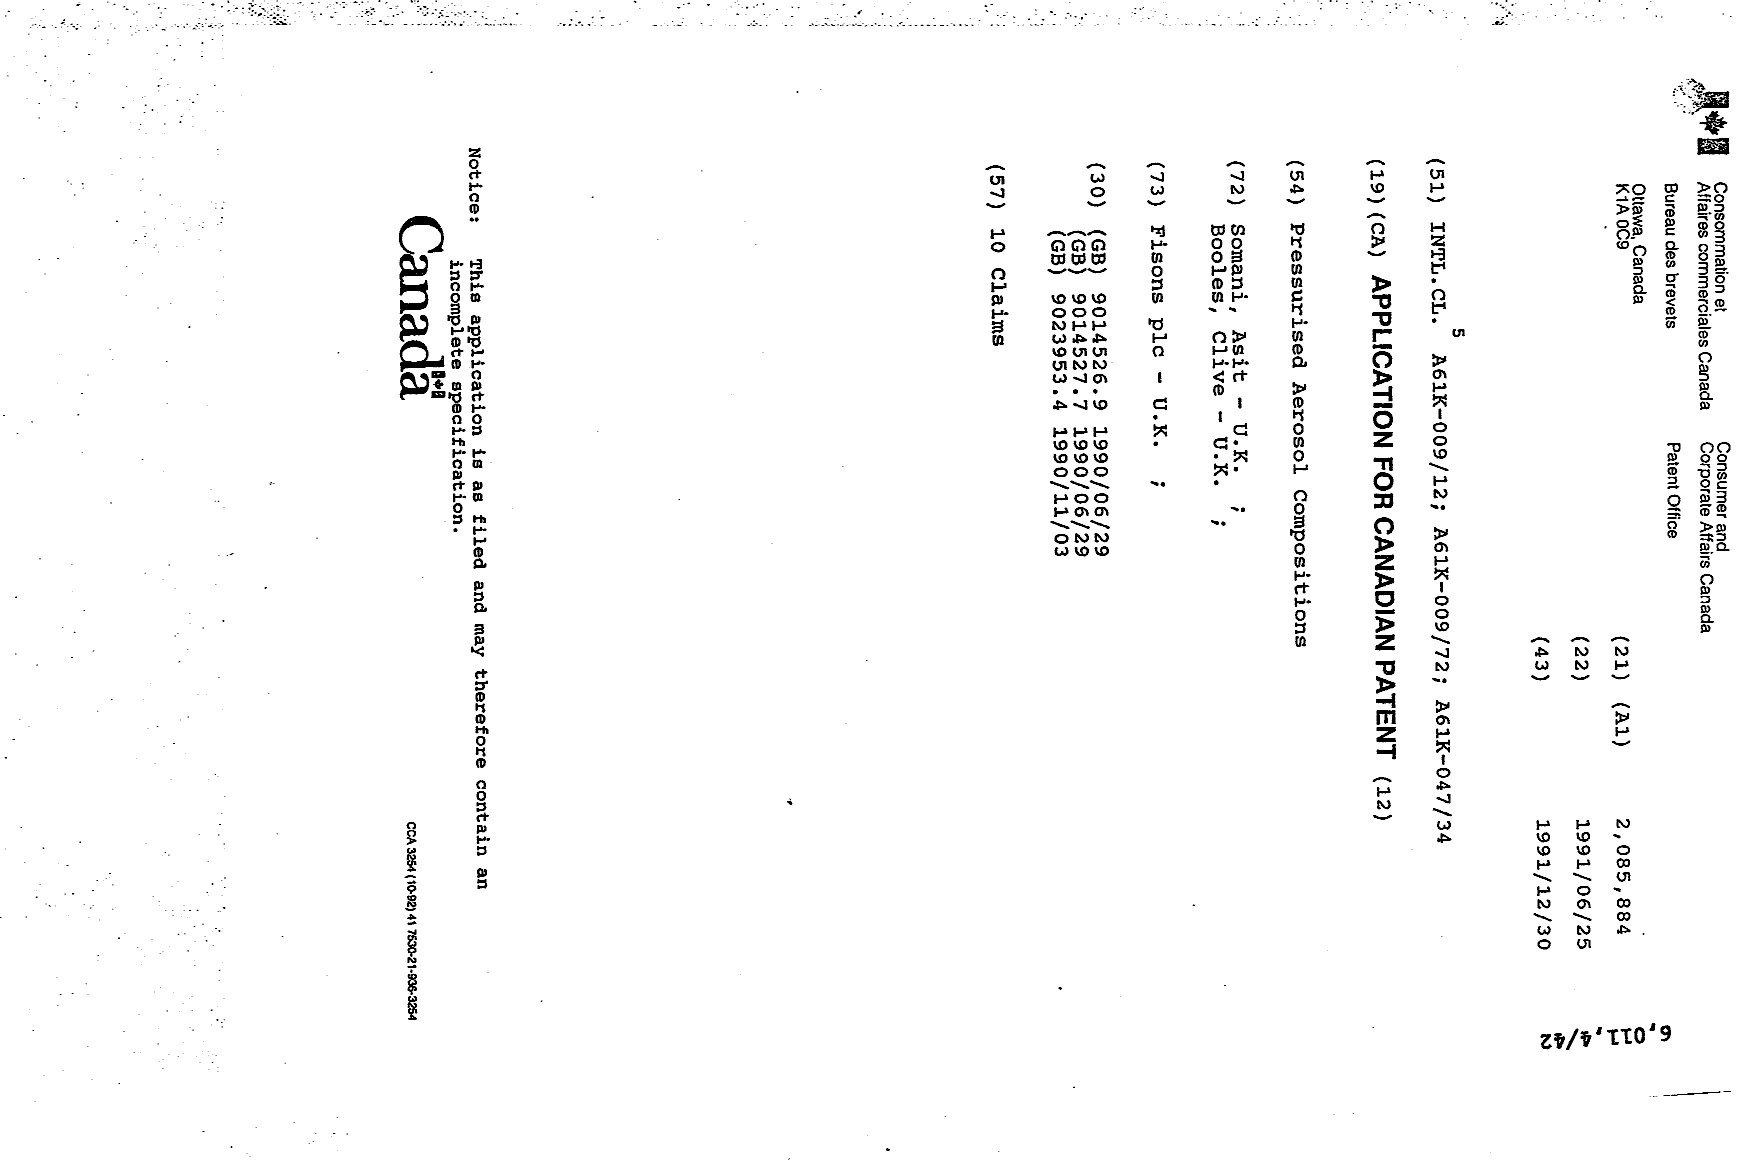 Canadian Patent Document 2085884. Cover Page 19940618. Image 1 of 1